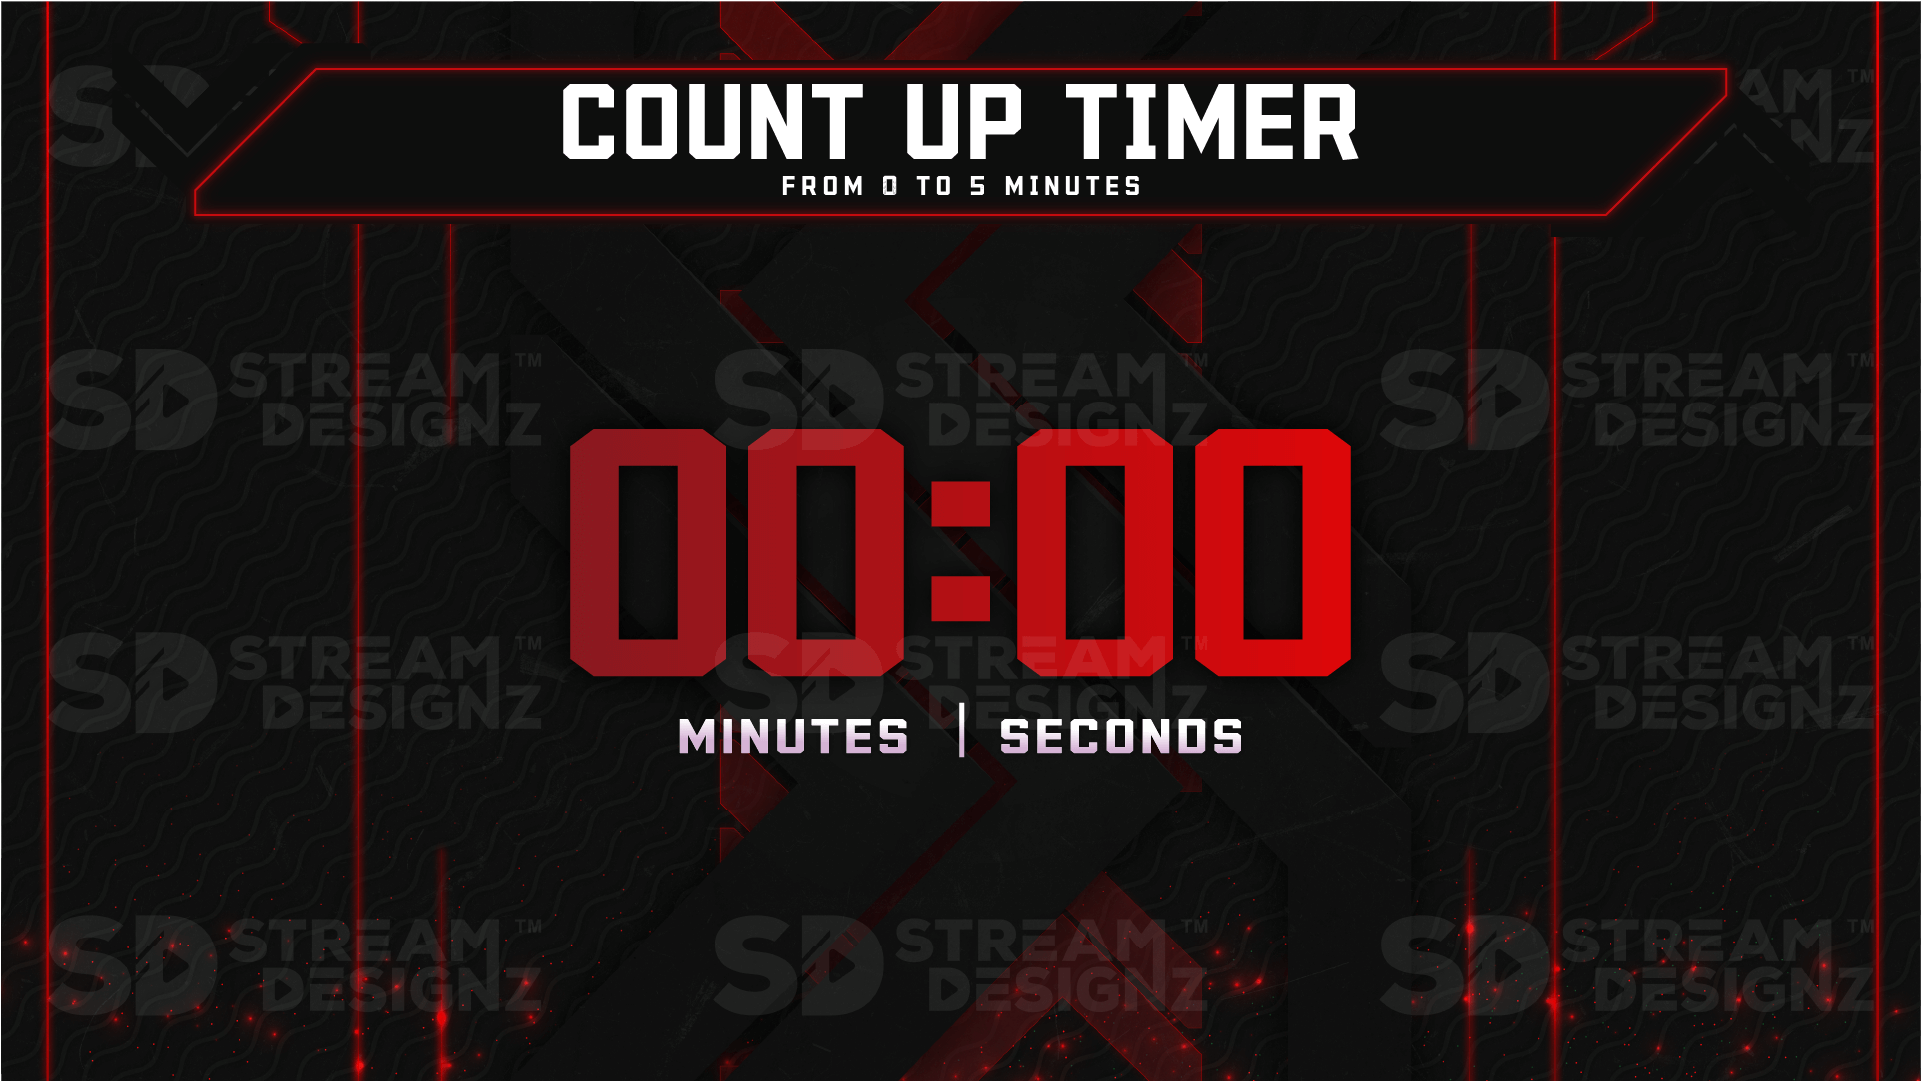 Ultimate stream package 5 minute count up timer code red stream designz